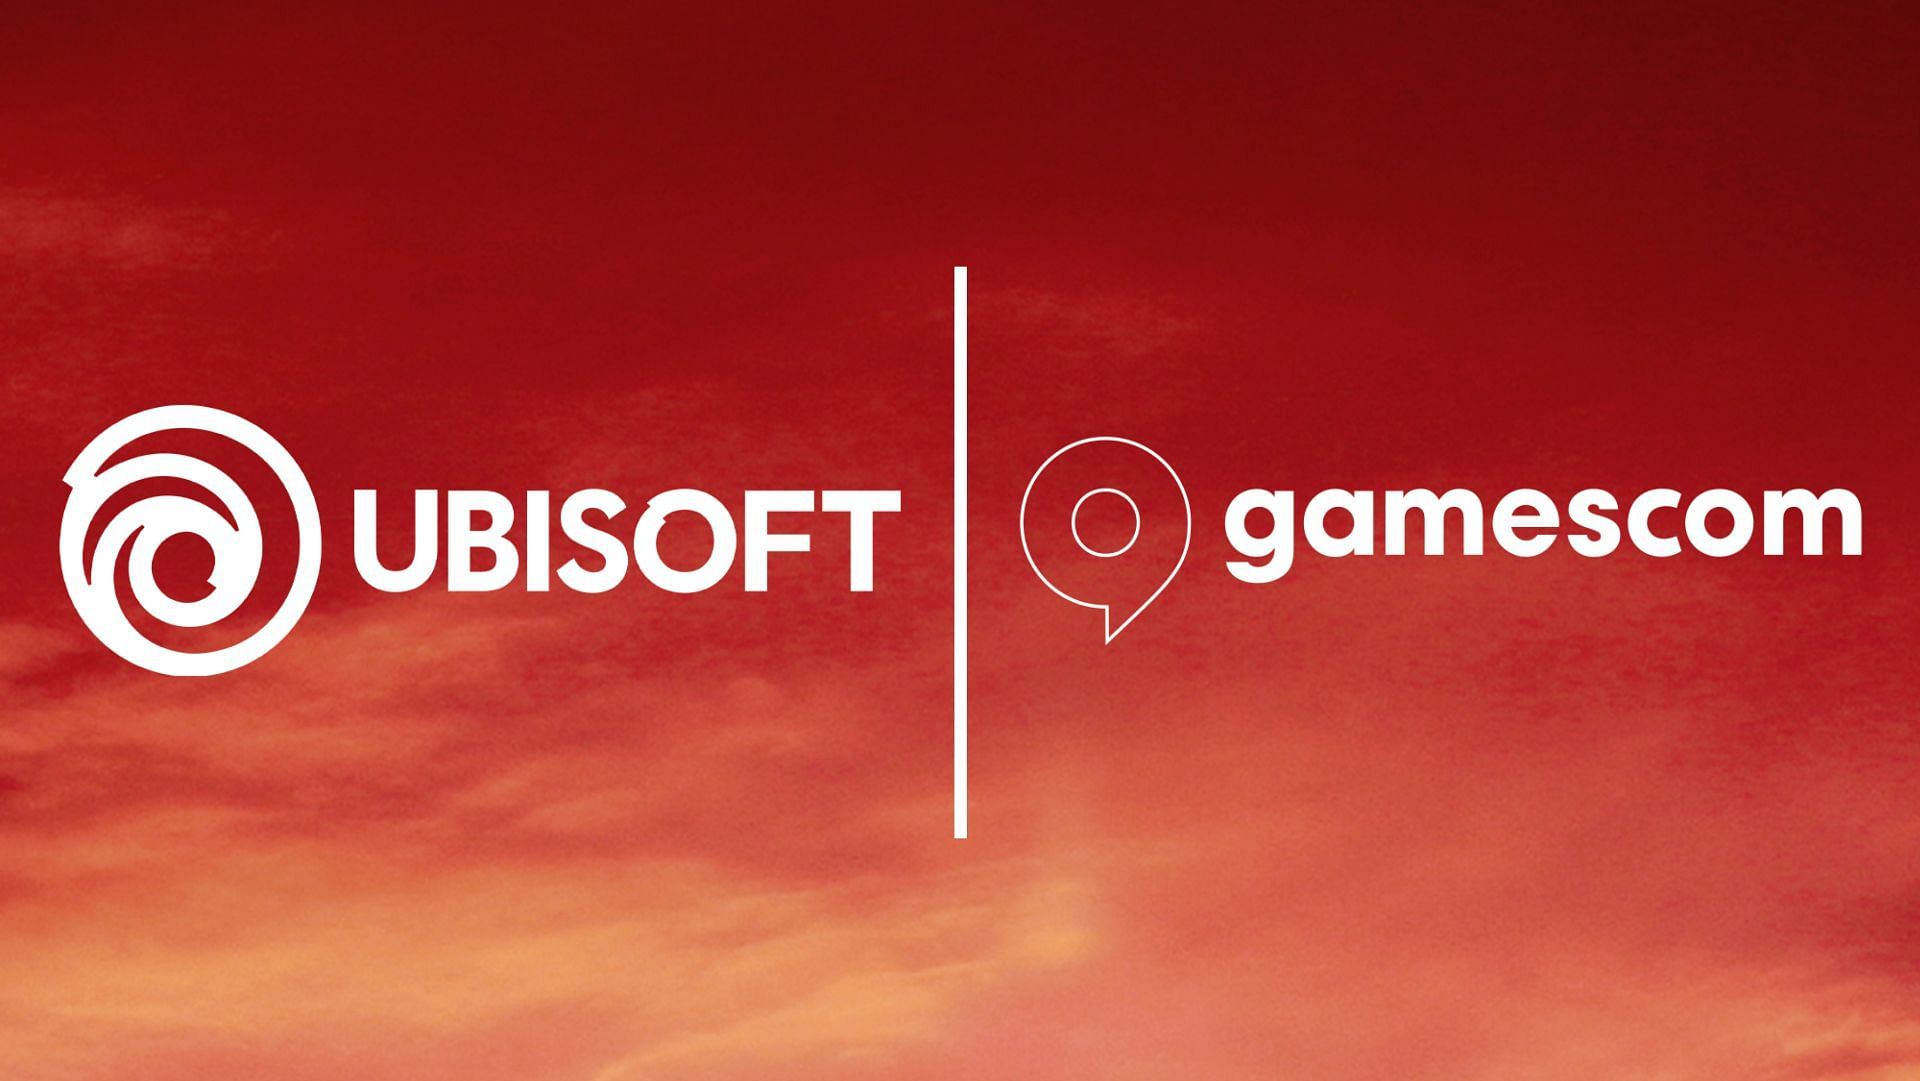 Ubisoft will be present at Gamescom to provide updates on some of its most anticipated games (Image via Ubisoft)